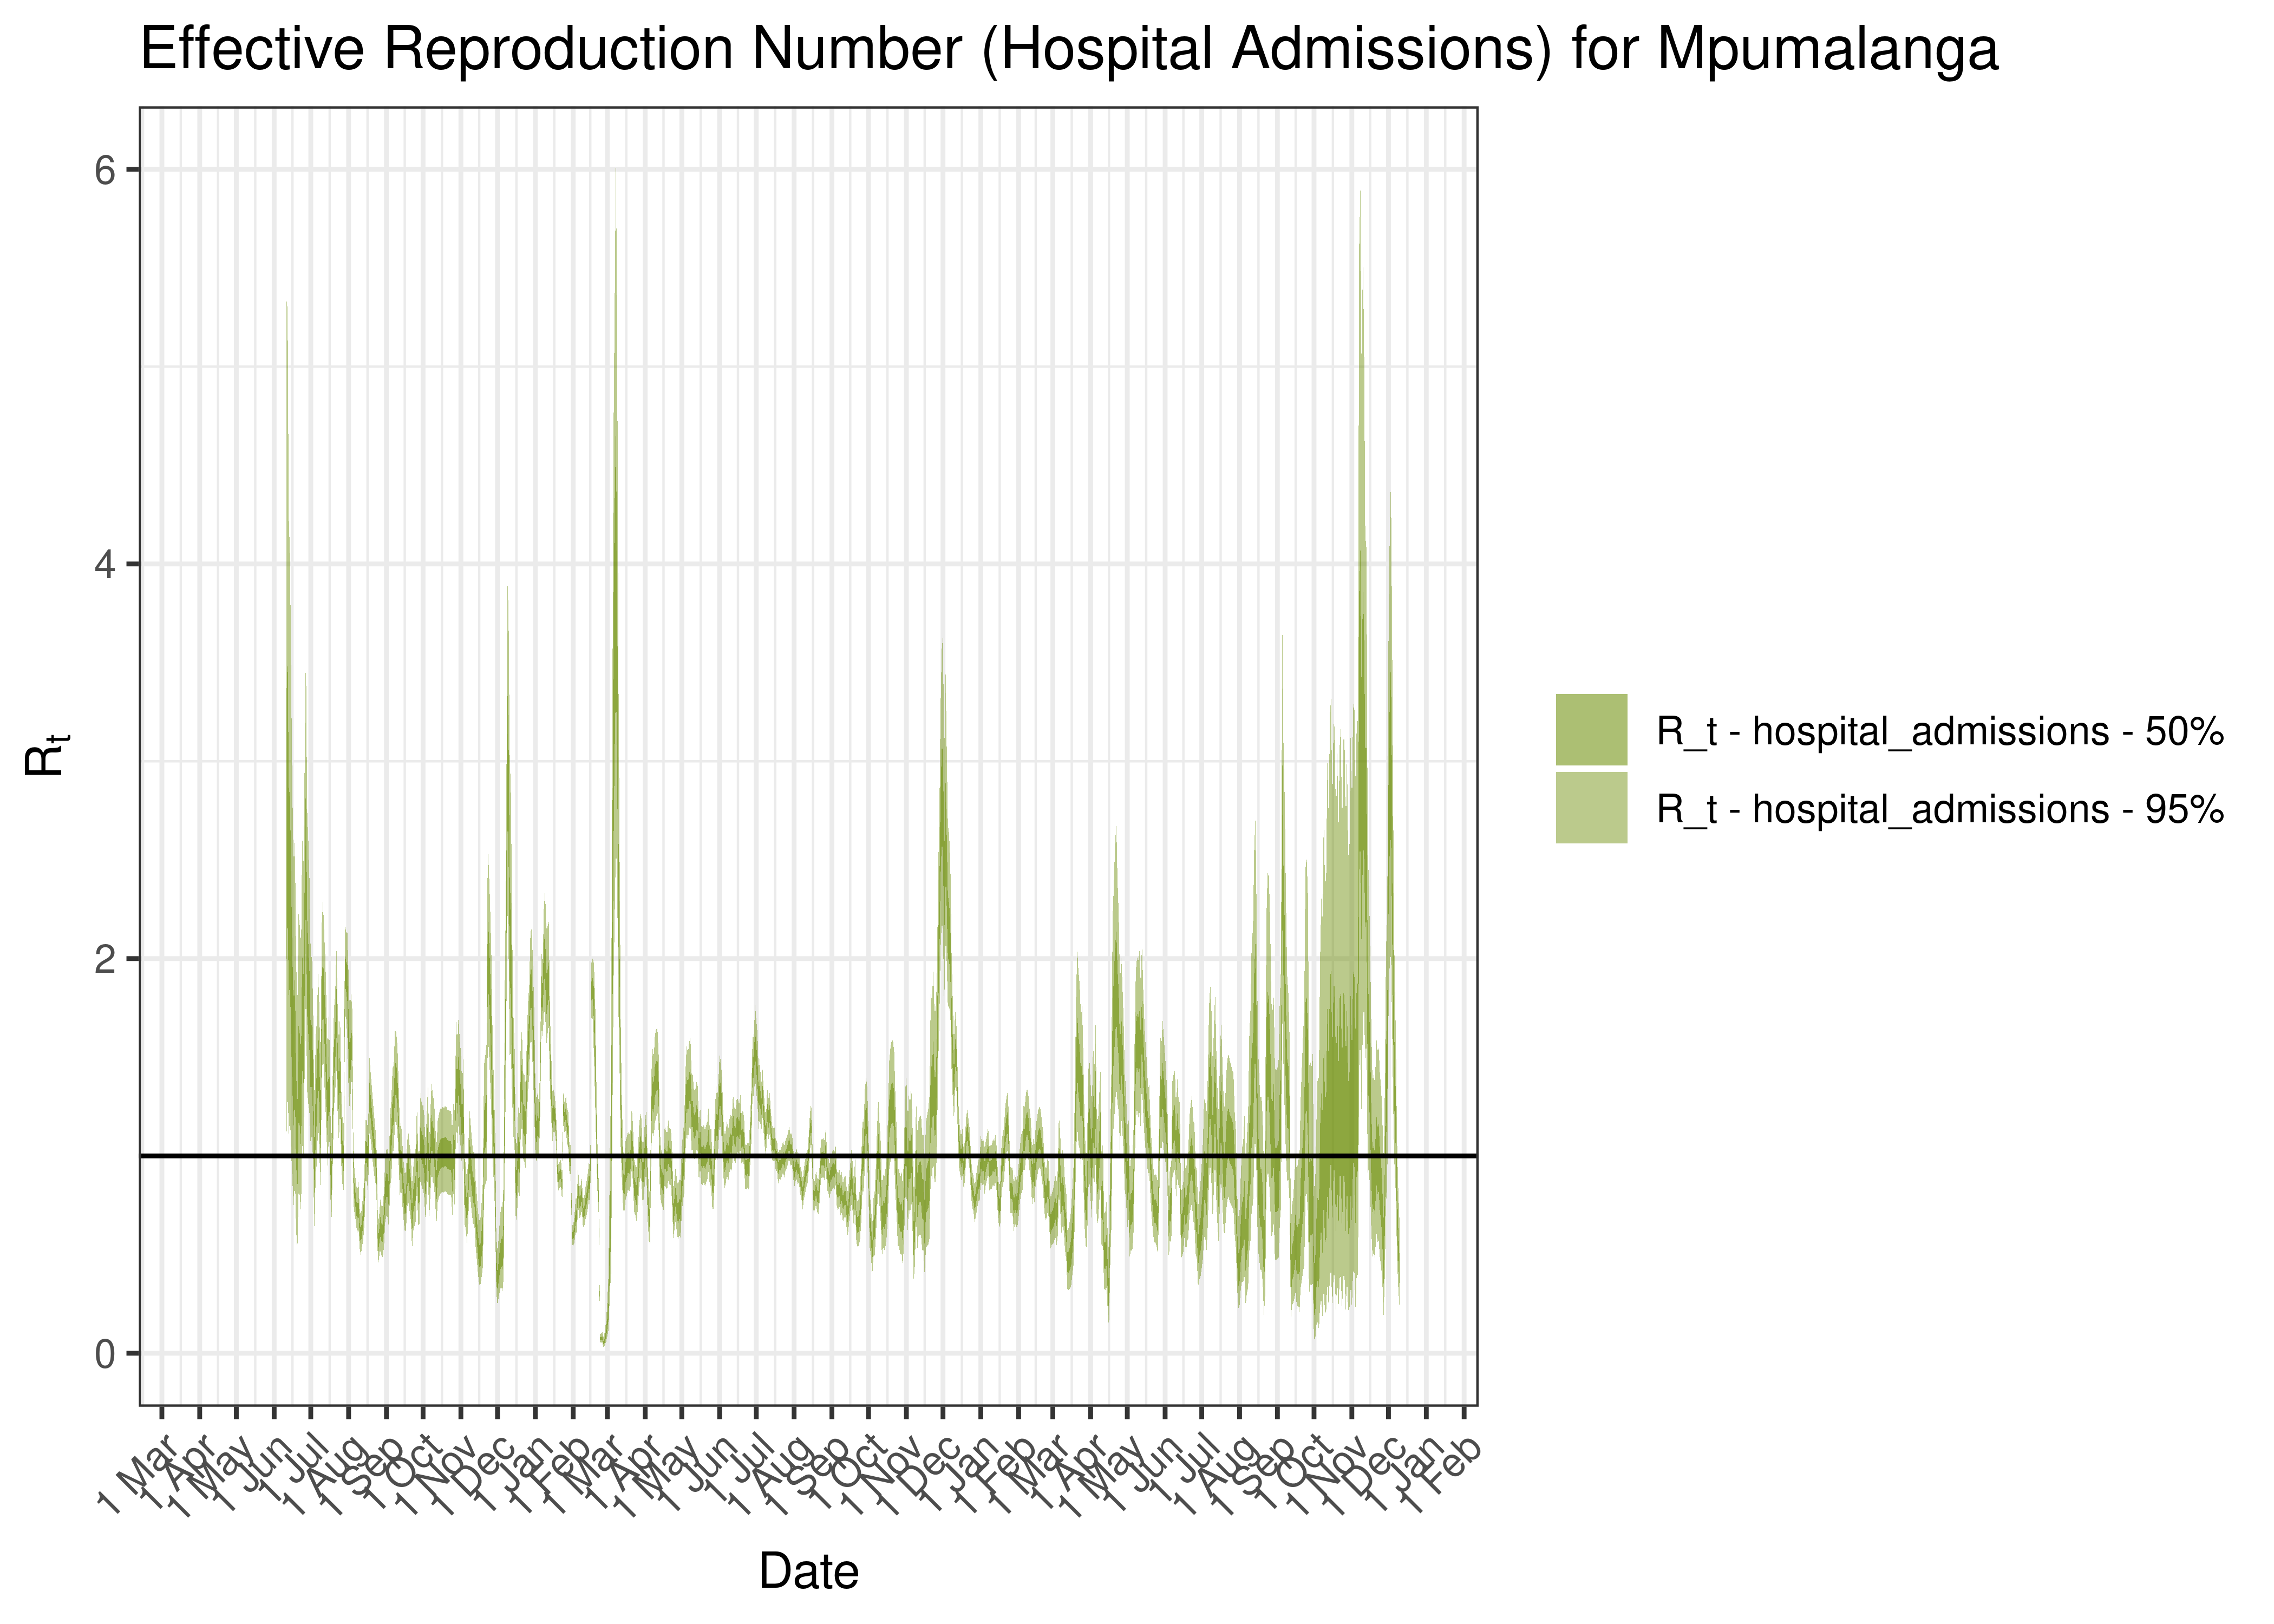 Estimated Effective Reproduction Number Based on Hospital Admissions for Mpumalanga since 1 April 2020